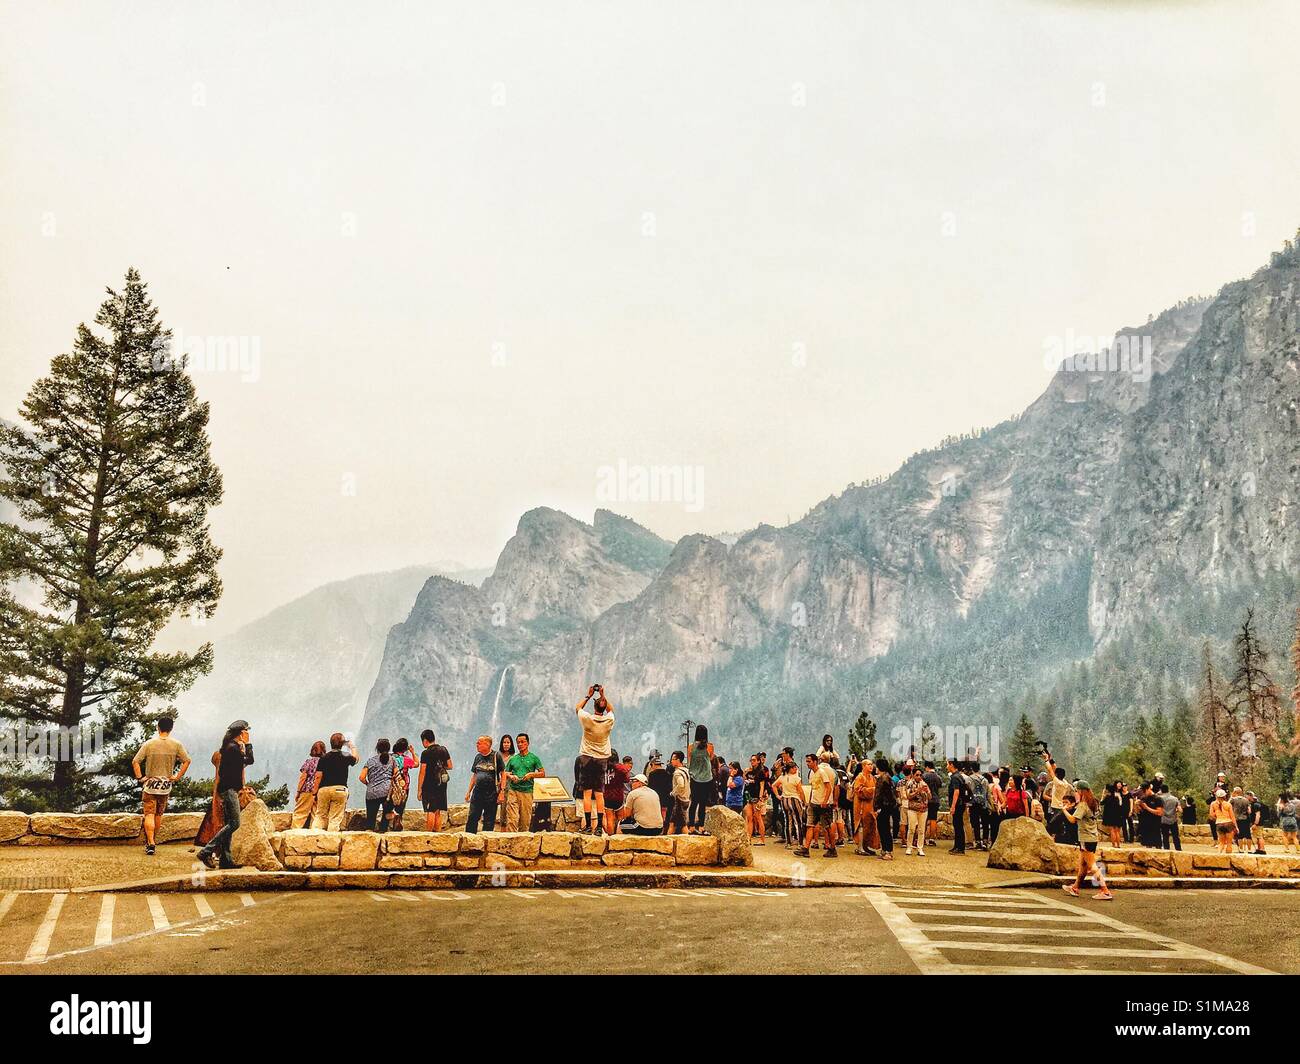 People enjoy majestic view of scenic Yosemite valley from look out.  Yosemite National Park, California, America Stock Photo